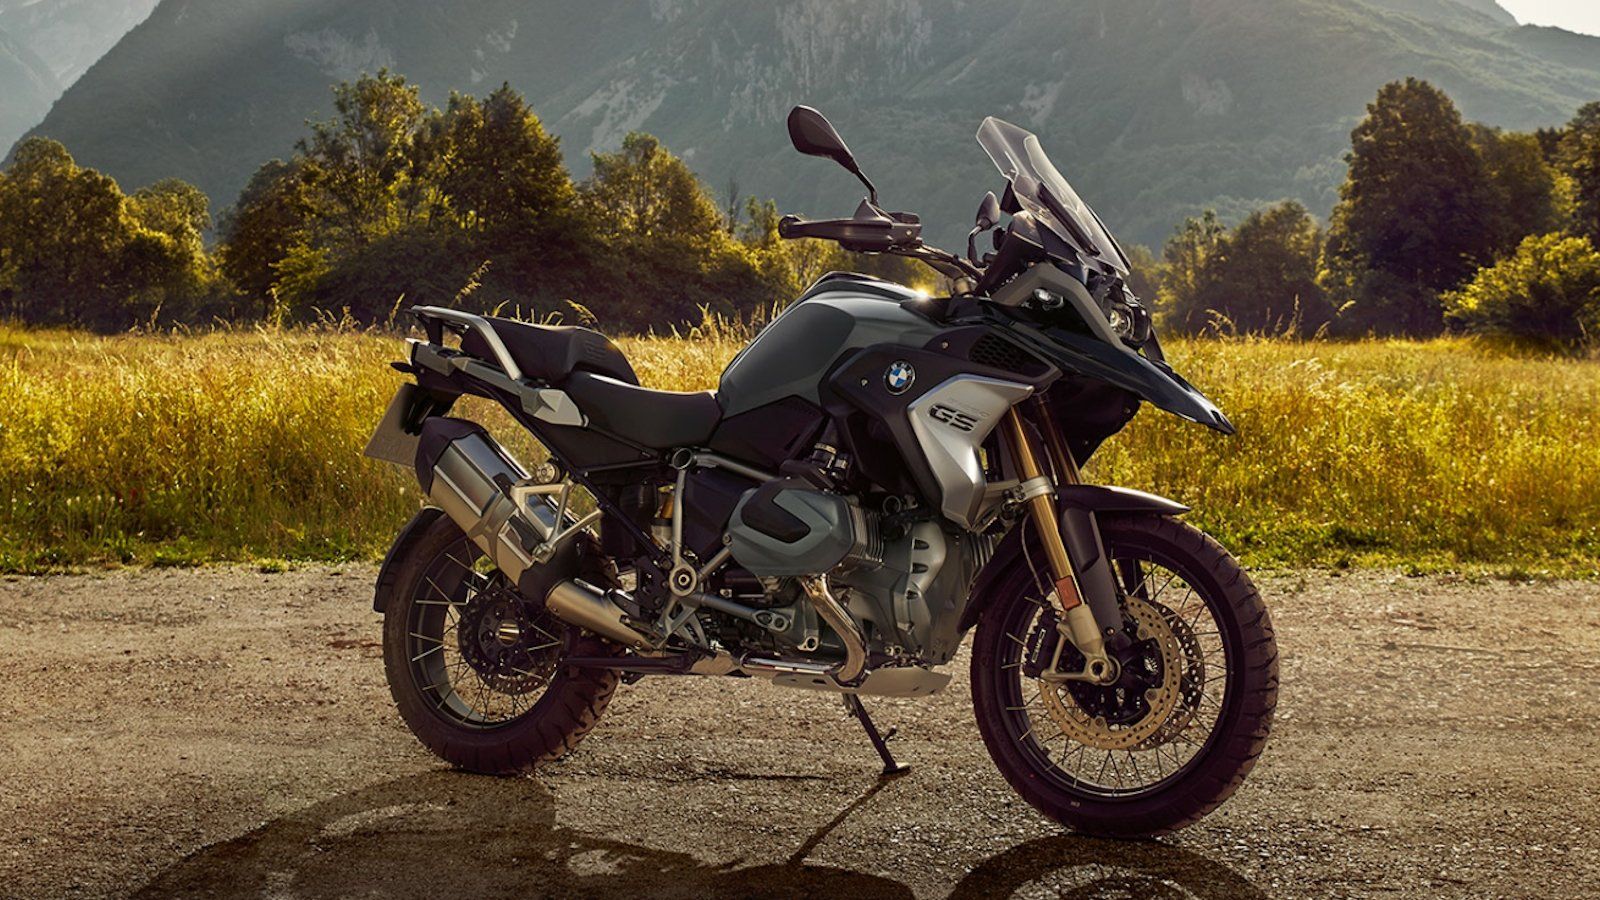 BMW R 1250 GS Picture, Photo, Wallpaper And Video